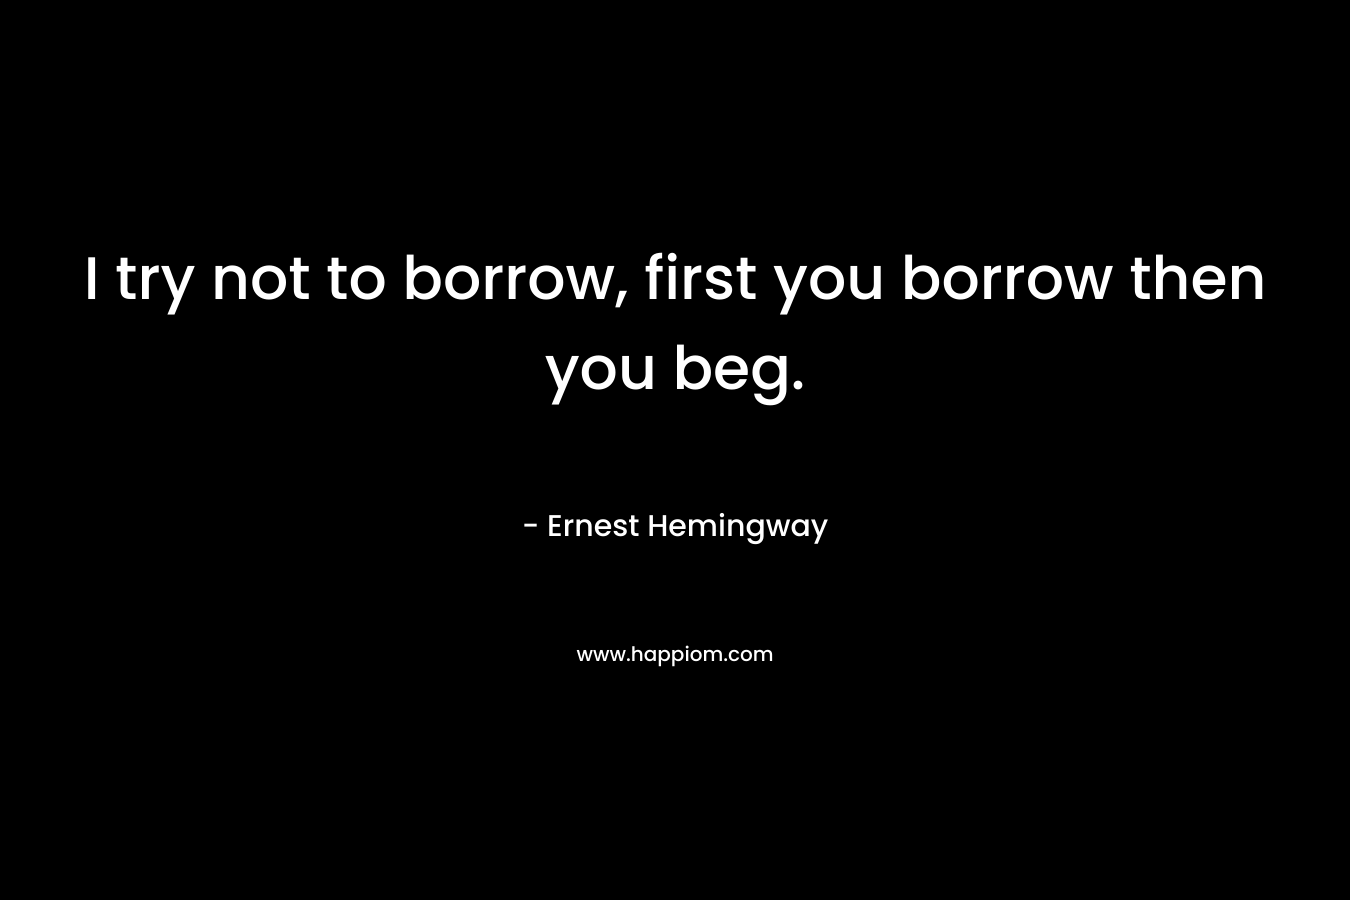 I try not to borrow, first you borrow then you beg. – Ernest Hemingway